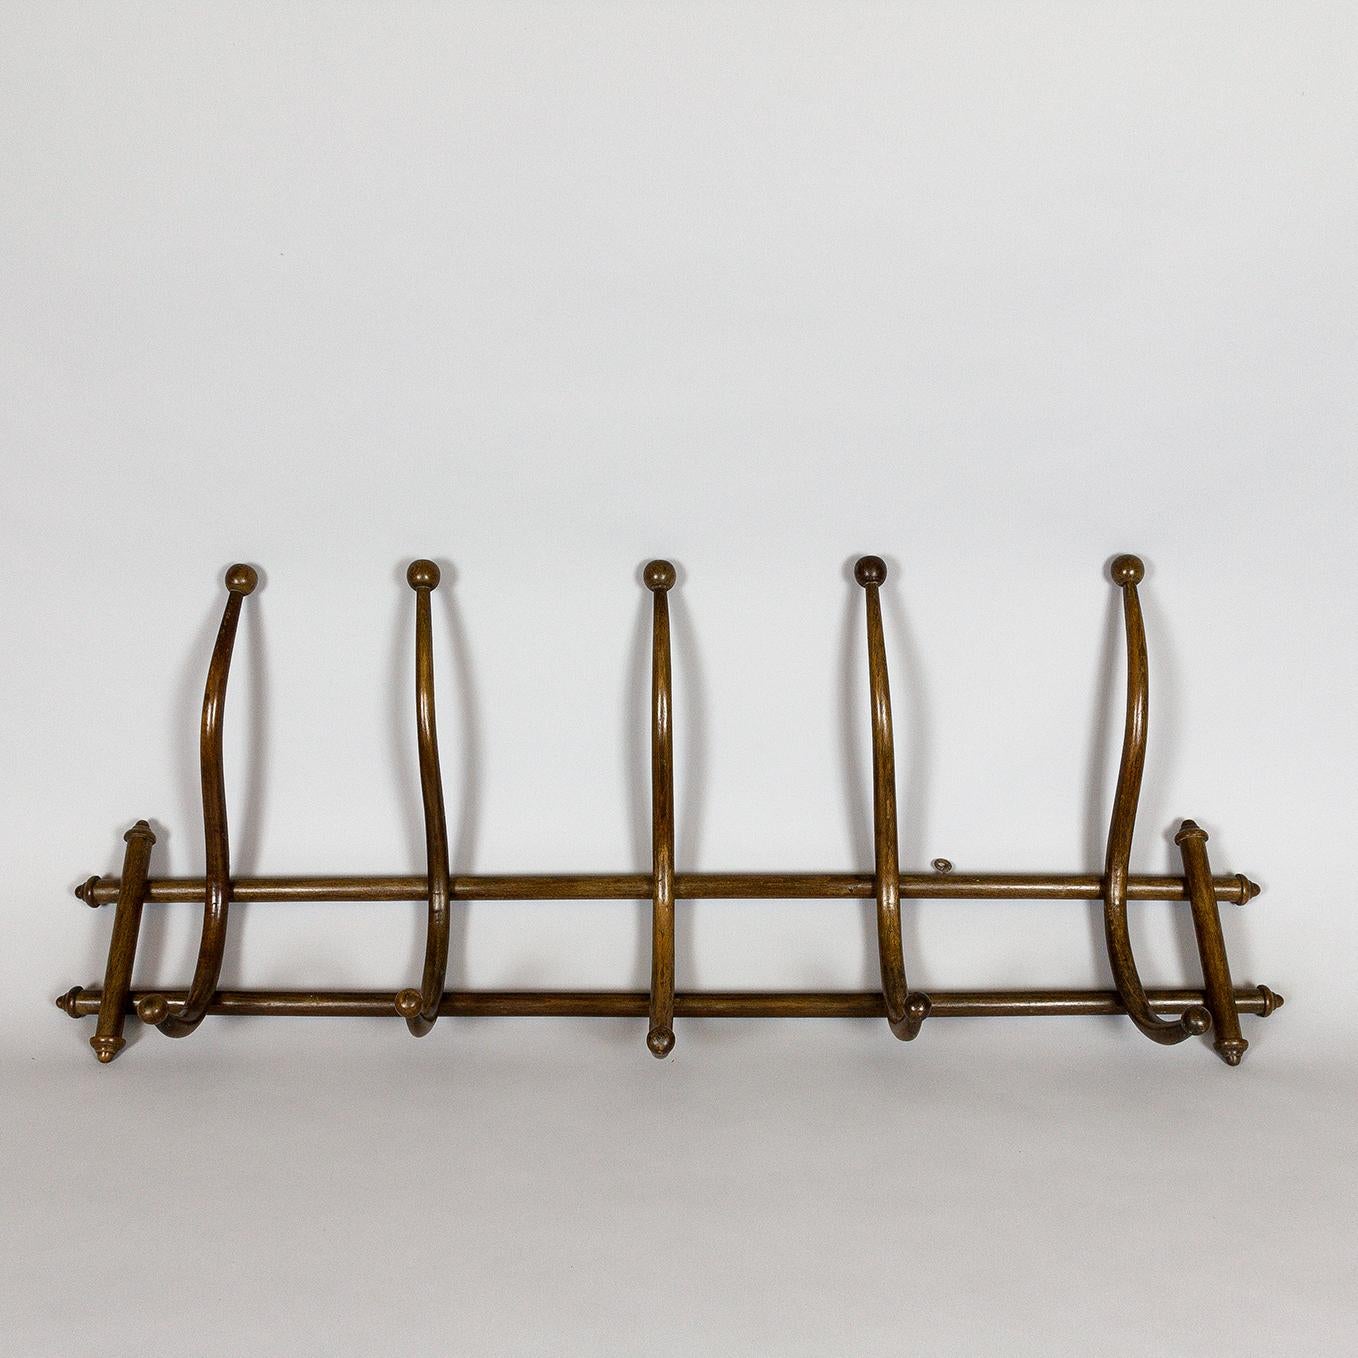 A very large Thonet style bentwood wall mounted hat and coat rack. 1920s, Austria. A real over-sized statement piece.

 